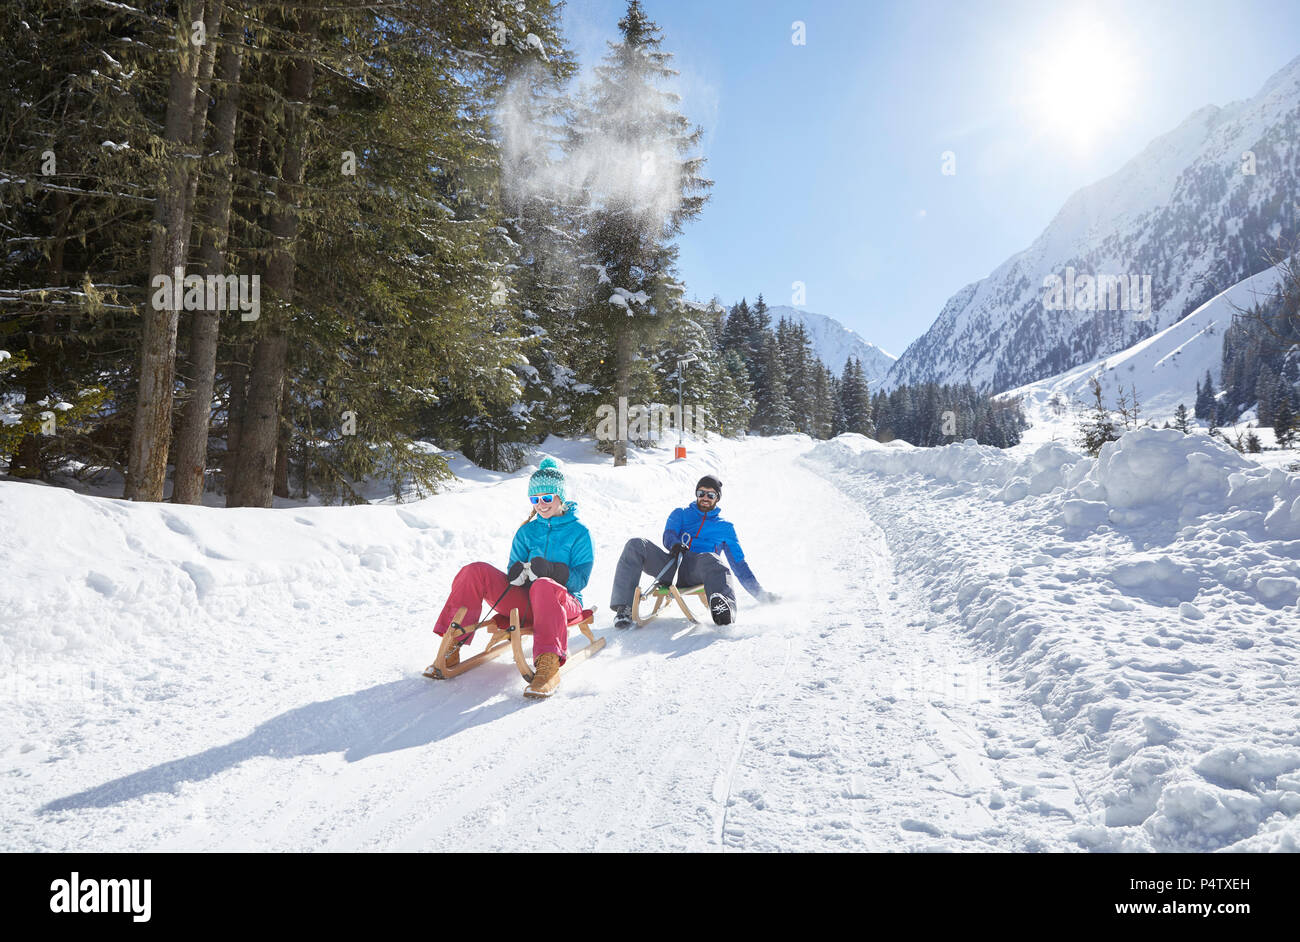 Couple sledding in snow-covered landscape Stock Photo